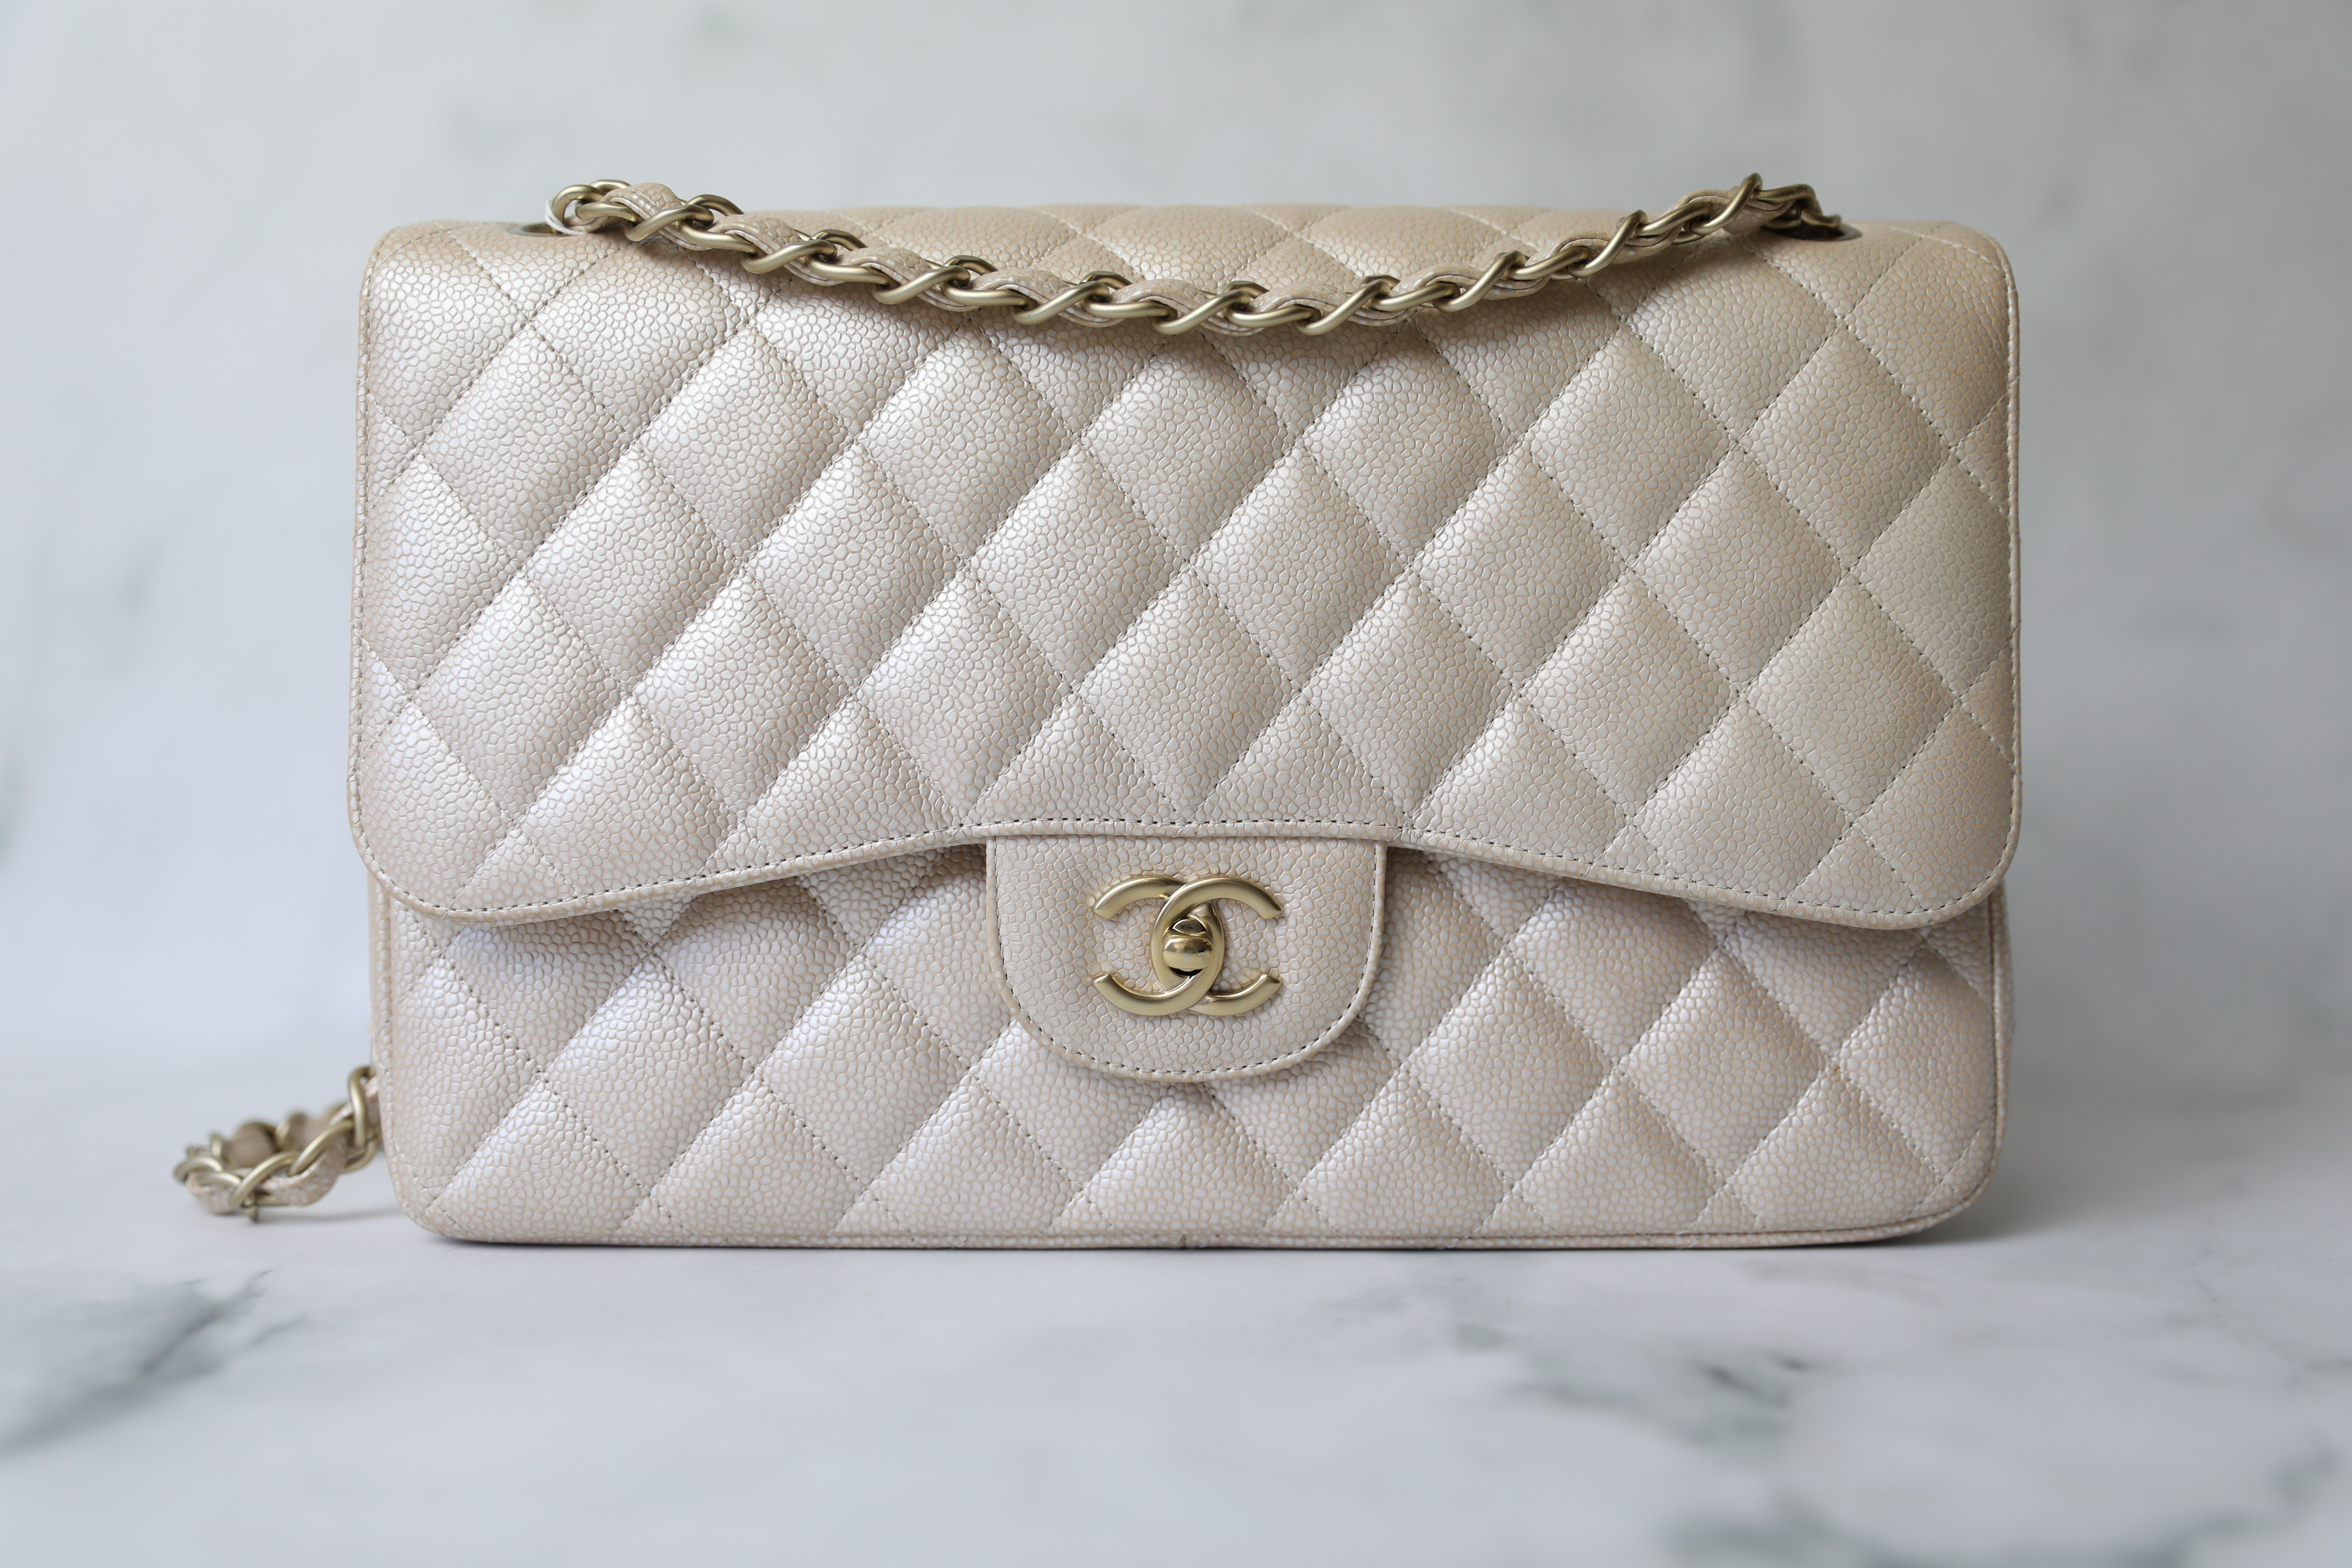 Chanel Classic Jumbo, Pearly Beige Caviar with Gold Hardware